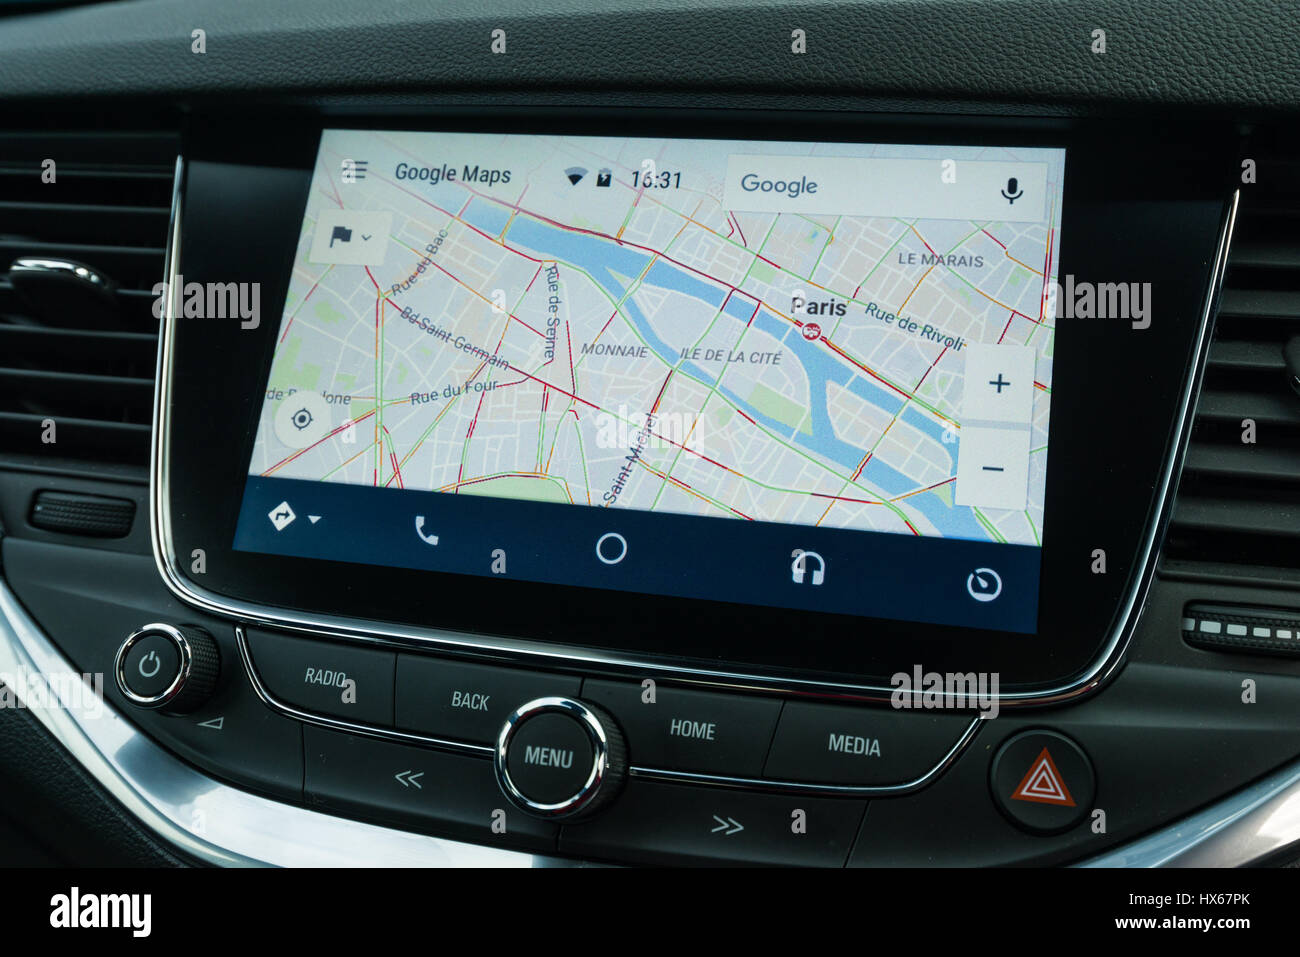 Android Auto Maps Navigation Car Vehicle Interface Showing Paris, France Stock Photo